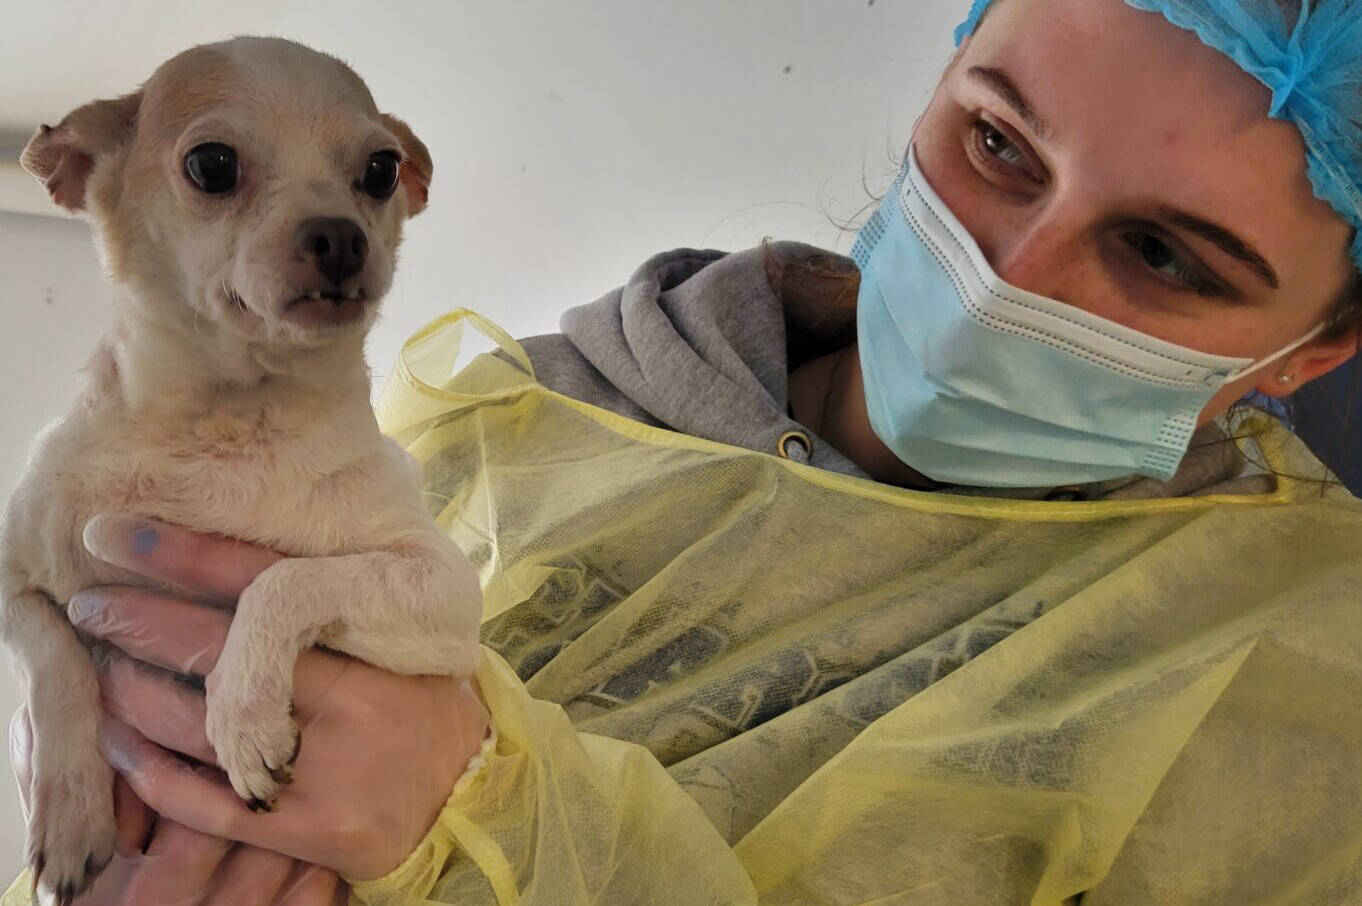 This chihuahua was among the animals rescued in Fort St. James. (BC SPCA)